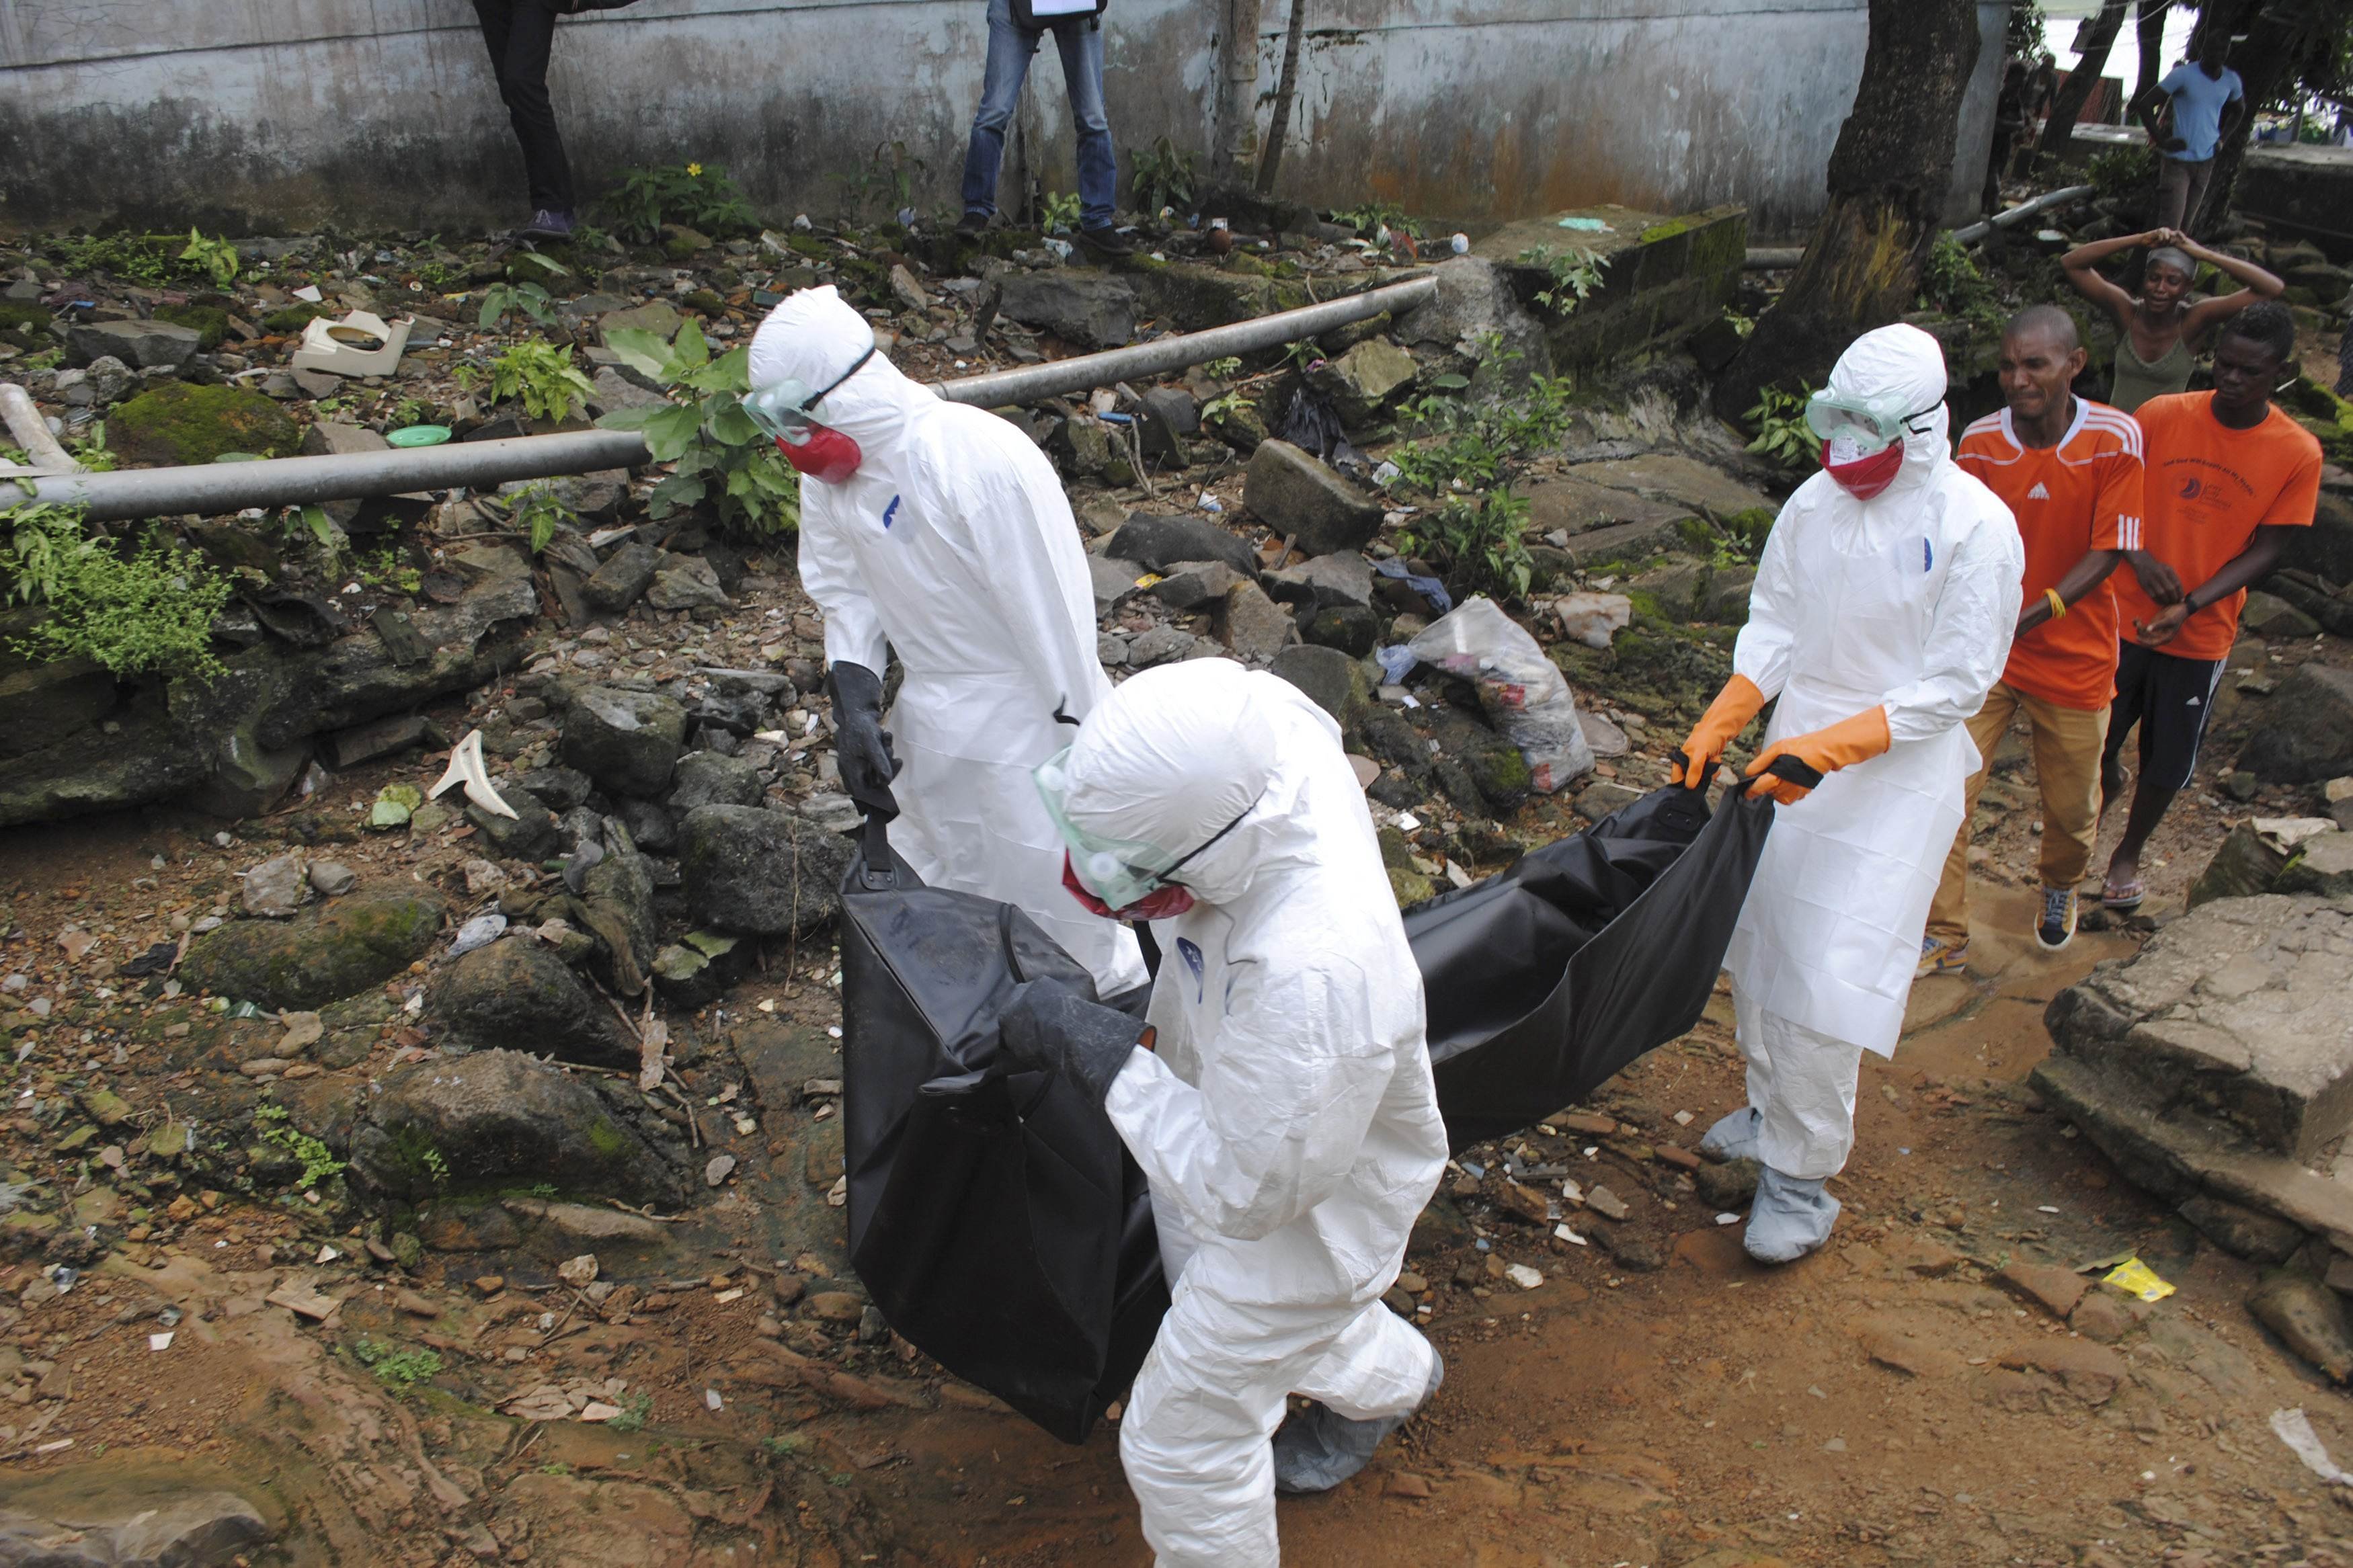 Health workers remove the body of Prince Nyentee, a 29-year-old man whom local residents said died of Ebola virus in Monrovia, Liberia on Sept. 11, 2014. (James Giahyue—Reuters)